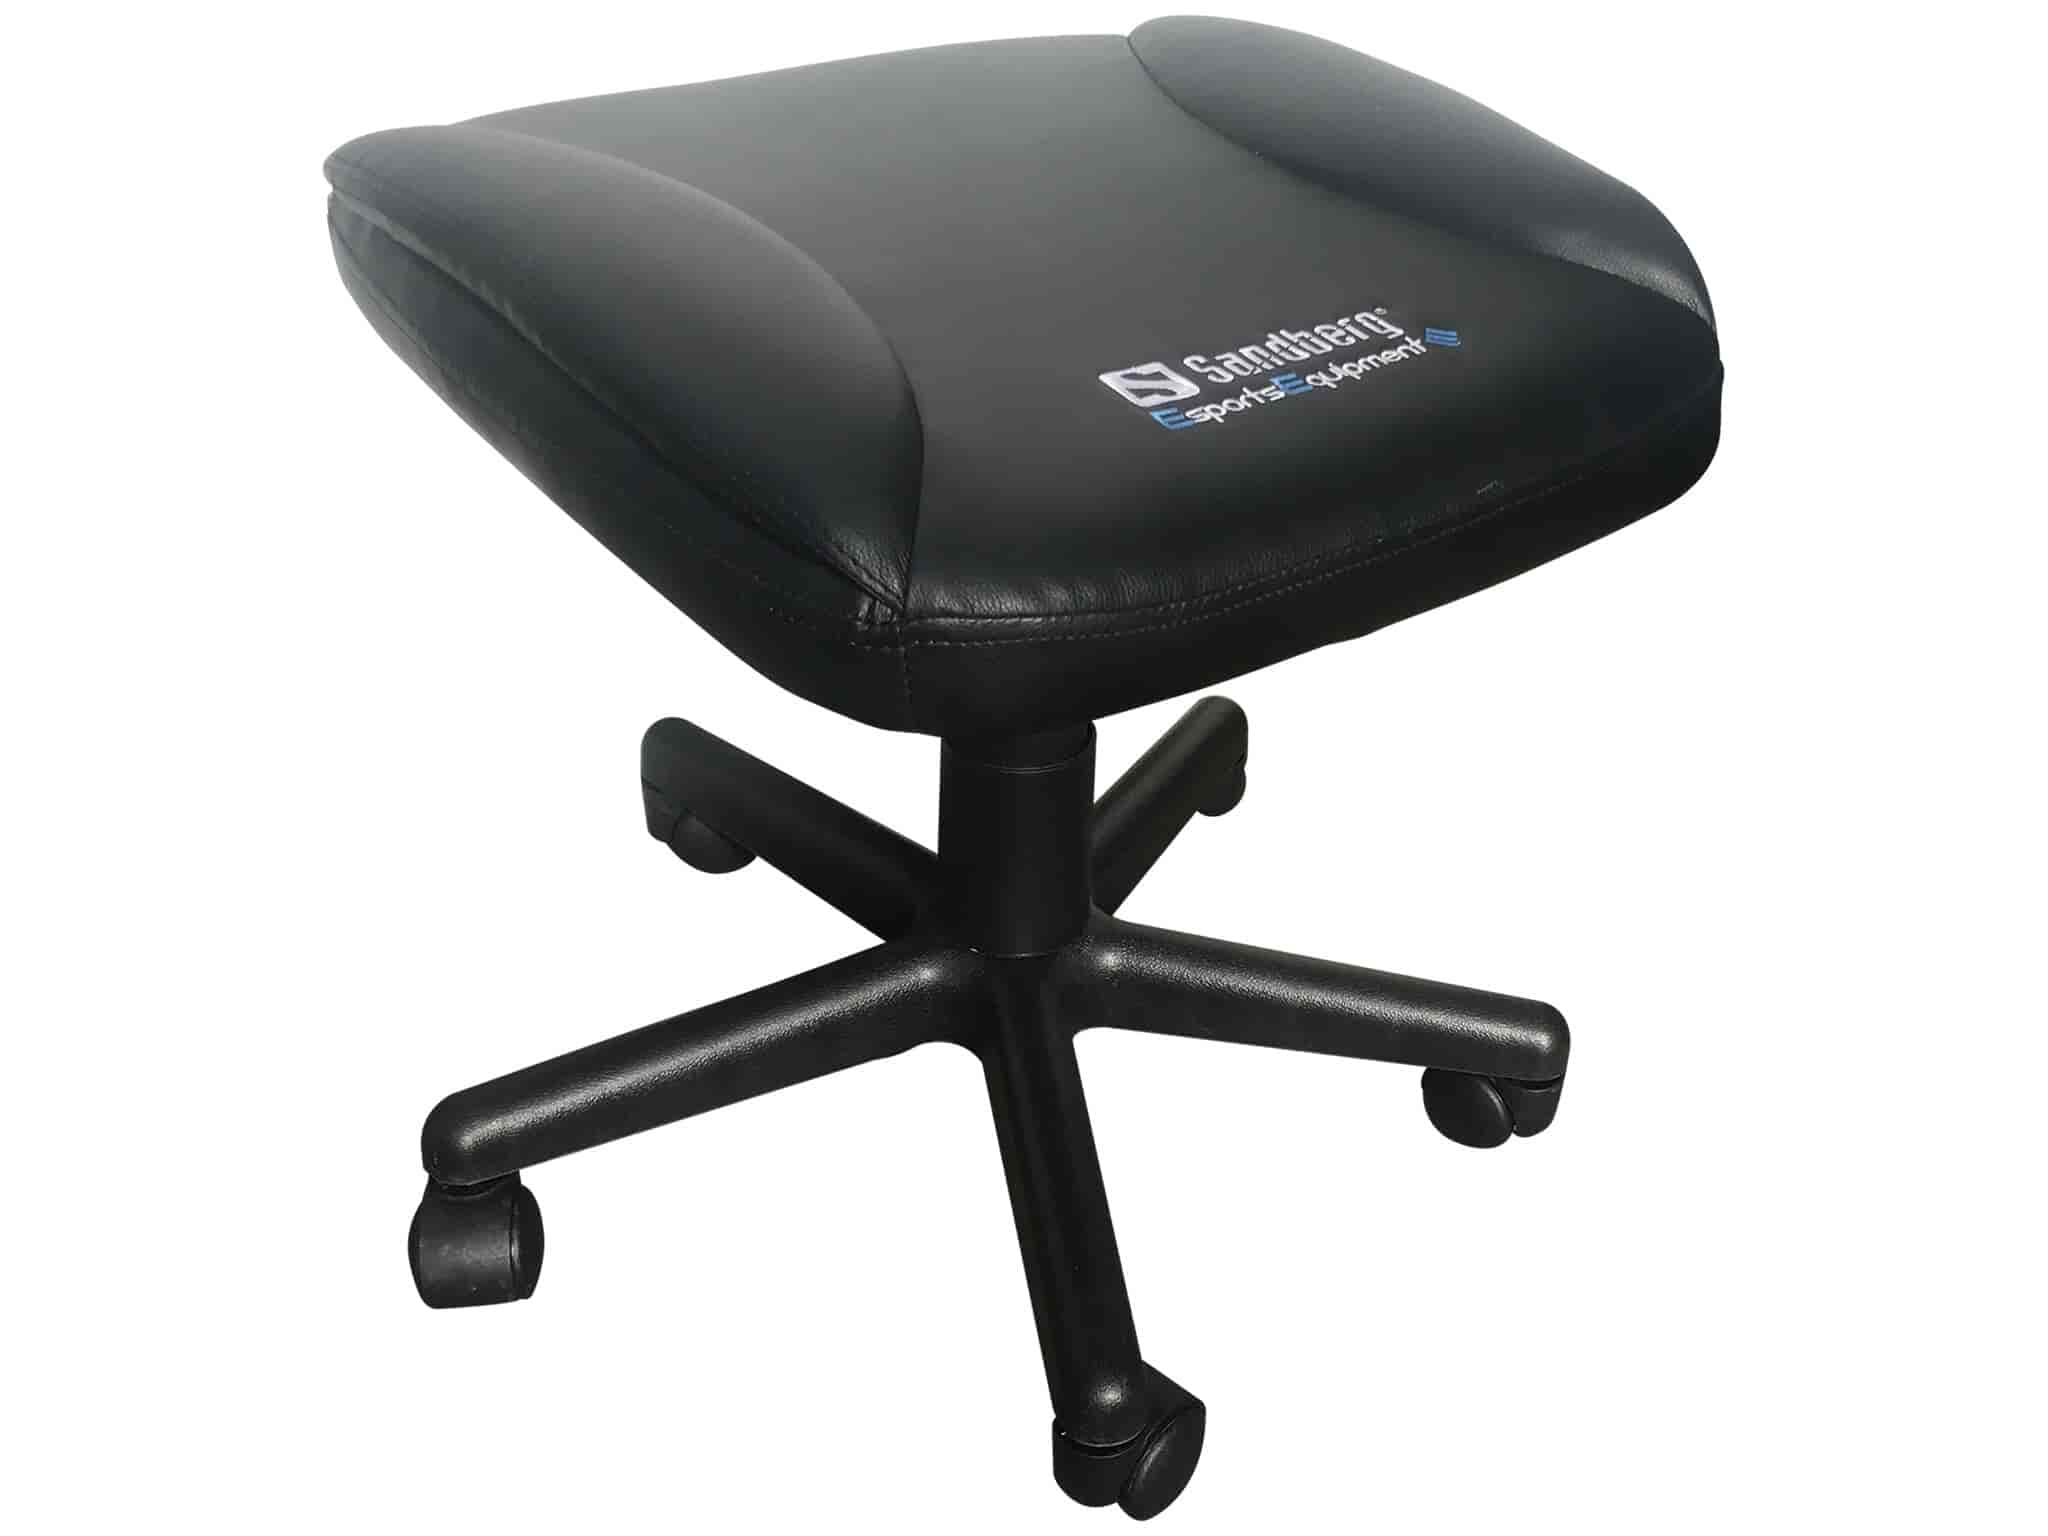 Sandberg Gaming Foot StoolThe Sandberg Gaming Foot Stool gives you extra comfort in your gaming setup! Easy to adjust the height to the position you find most relaxing. Wheeled undercarriage in common with a standard gaming chair, making it easy to move wherever you want. Just put your feet up on the stool and relax! Perfect if you want to use your gaming chair for relaxing in other contexts, such as in front of the TV or a console game.Sandberg